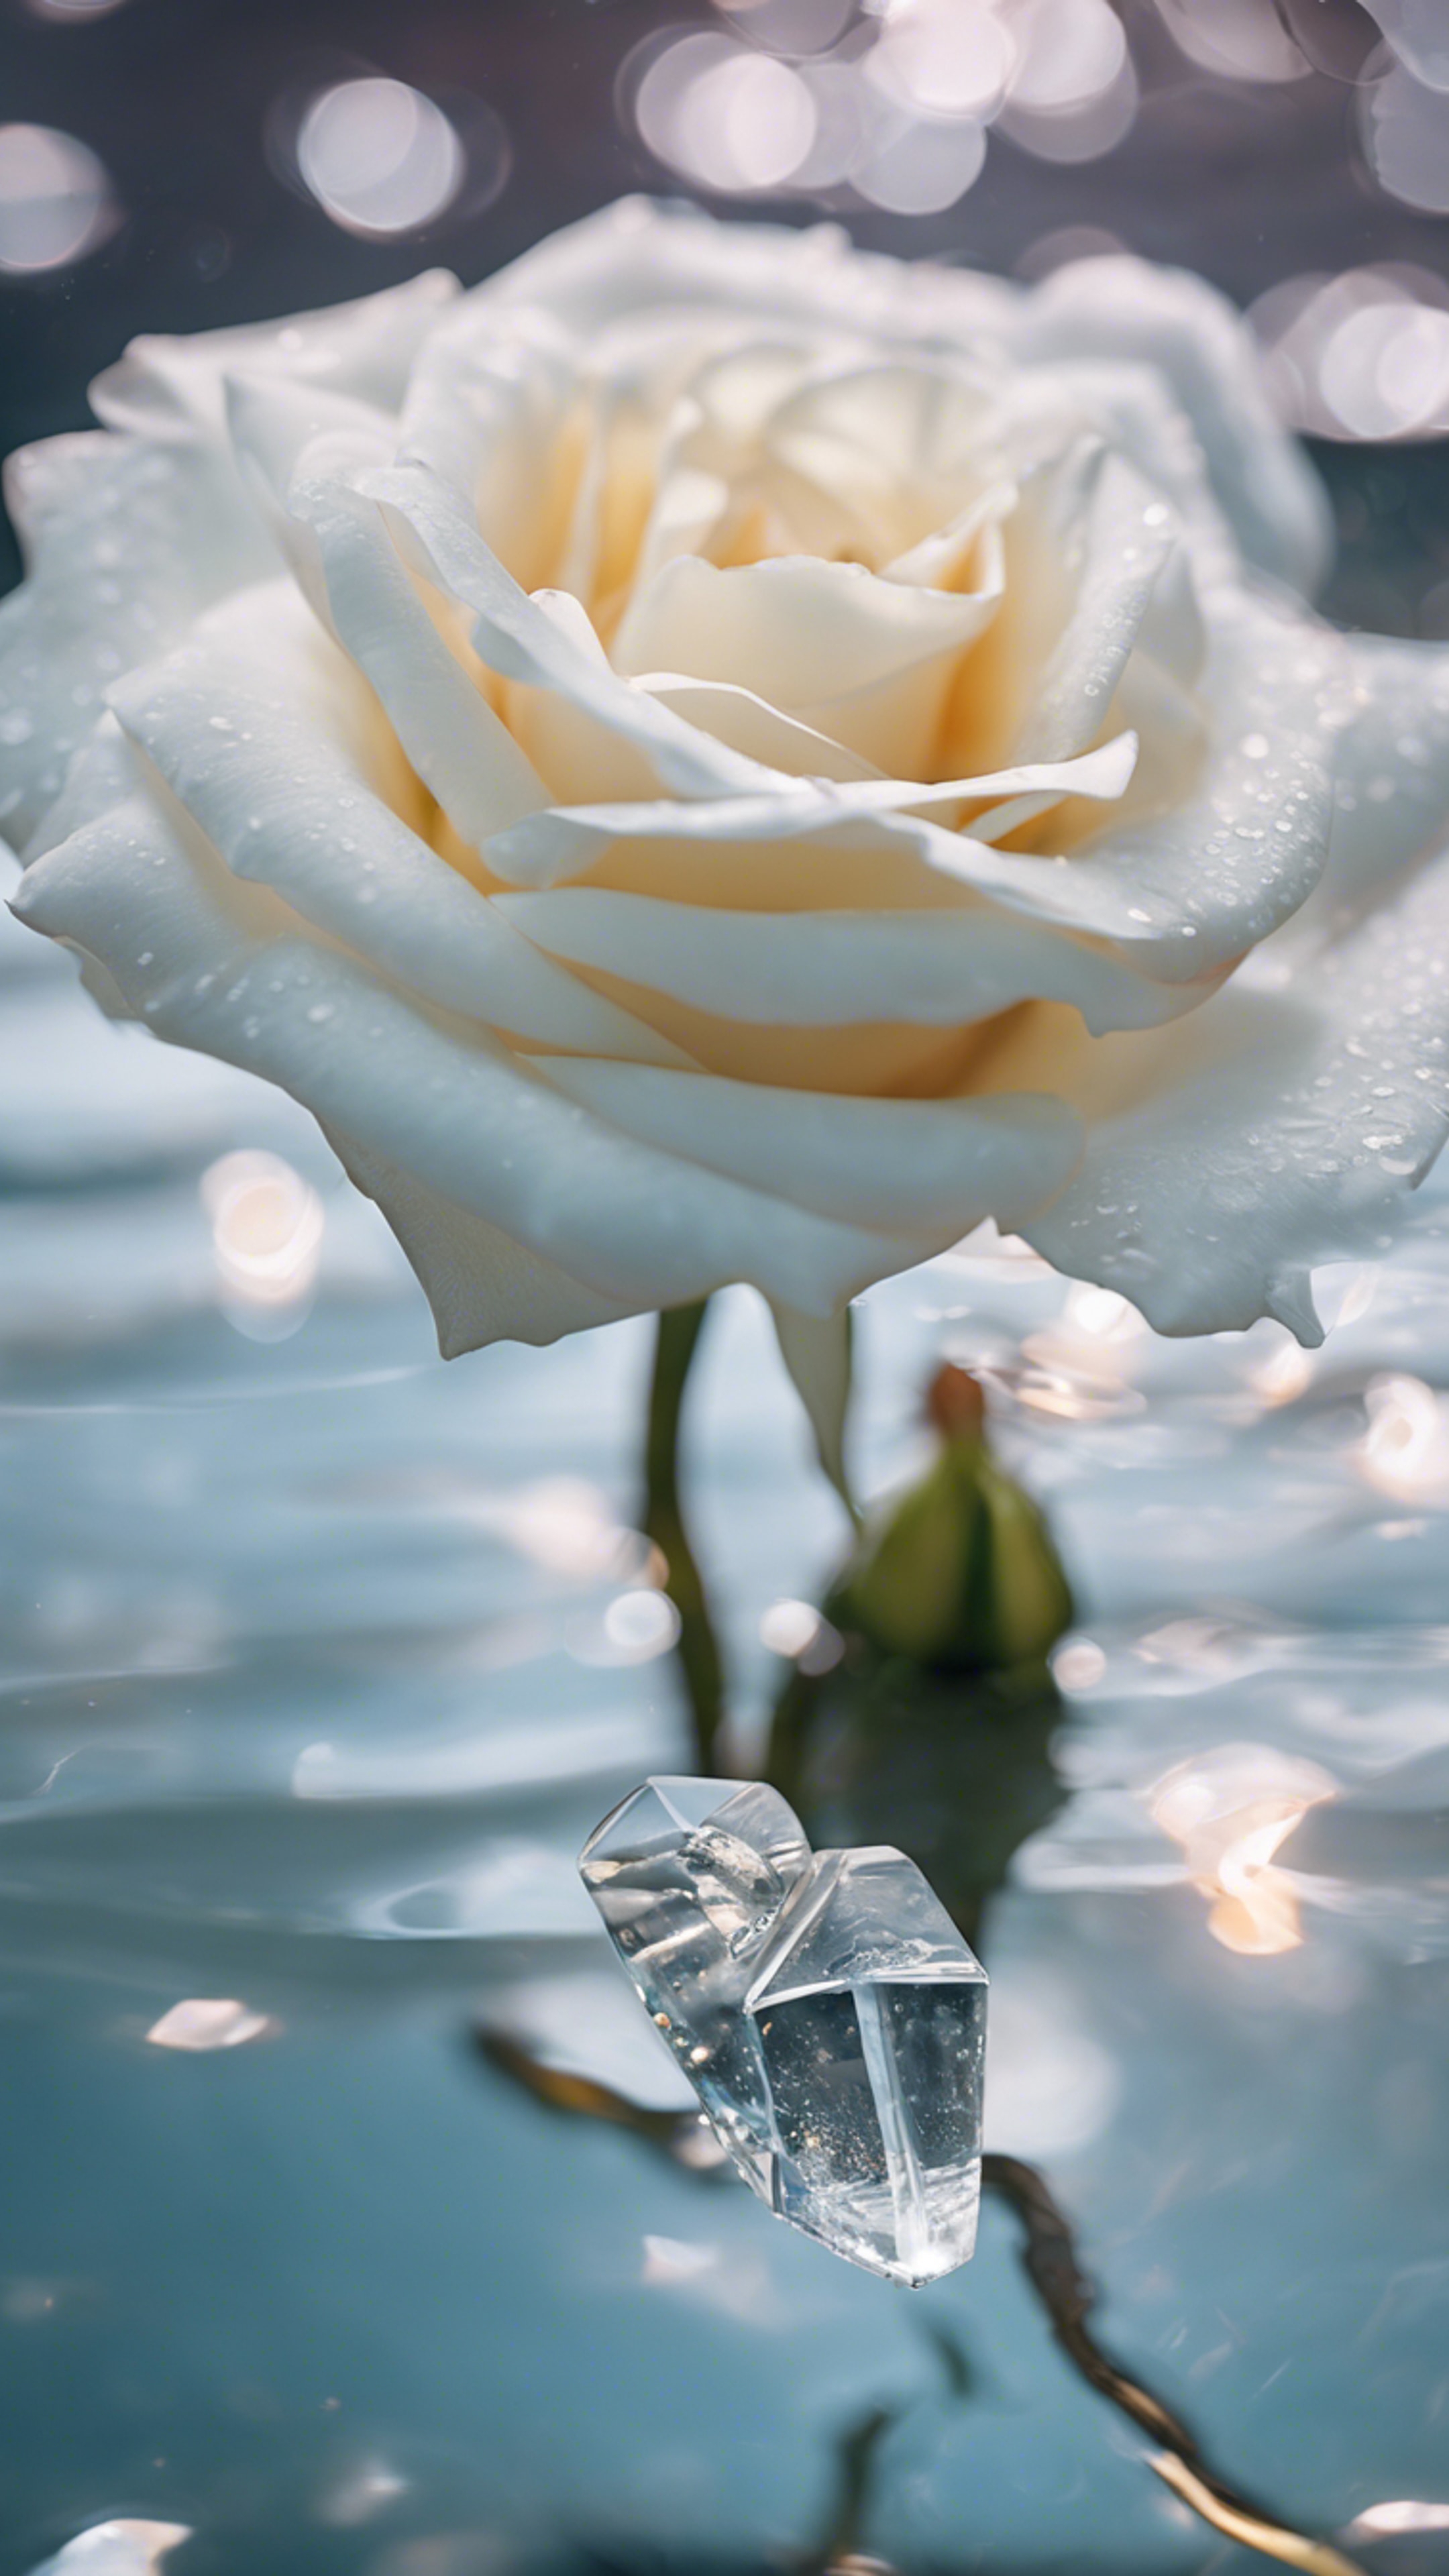 A white rose submerged in clear crystal water, petals gracefully spreading. Tapeta[af81d3e8e21443b29805]